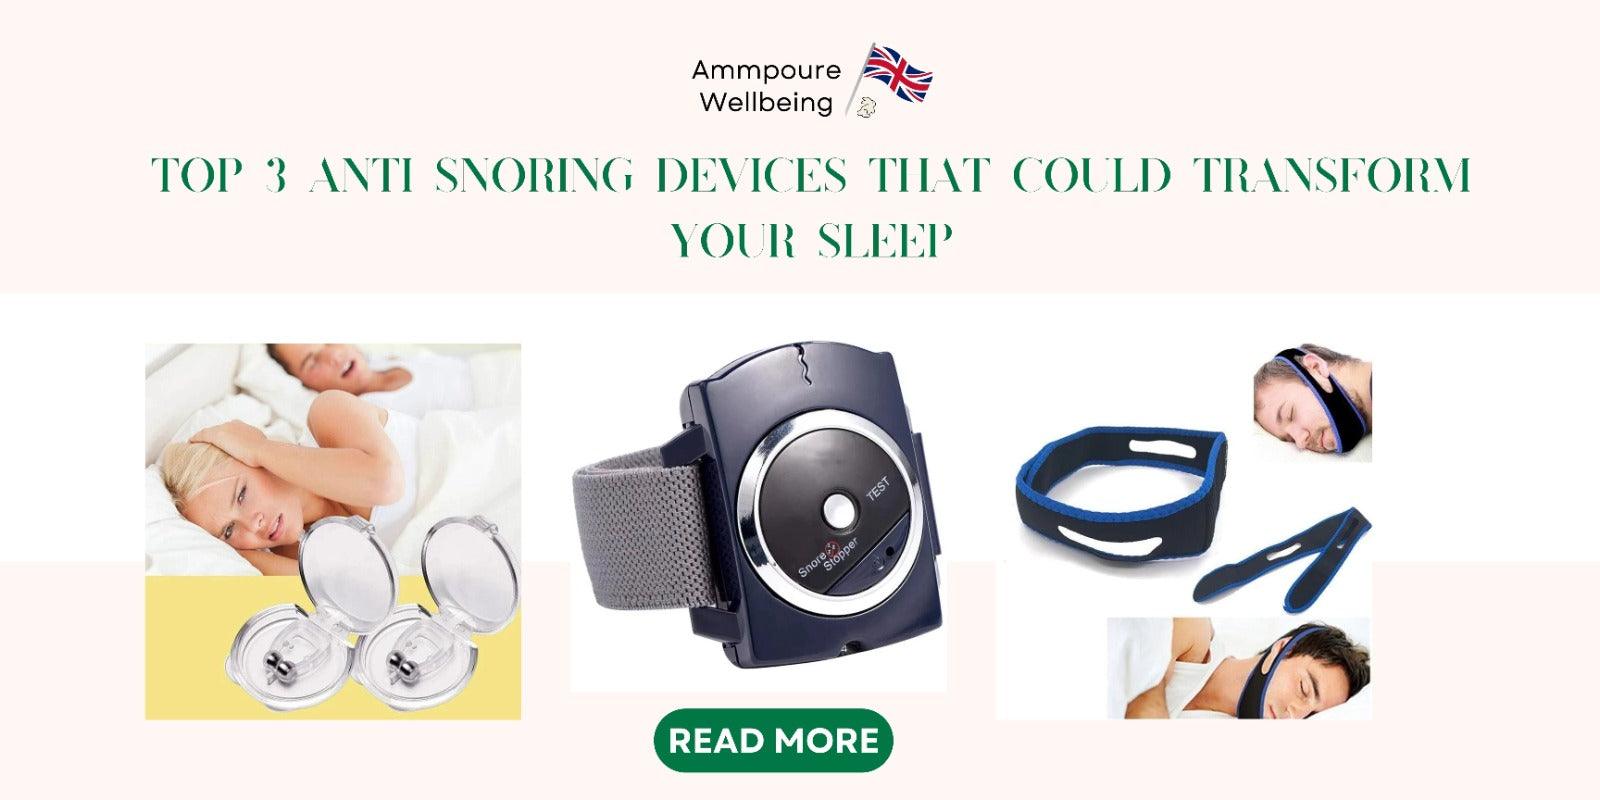 Top 3 Anti Snoring Devices That Could Transform Your Sleep - Ammpoure Wellbeing